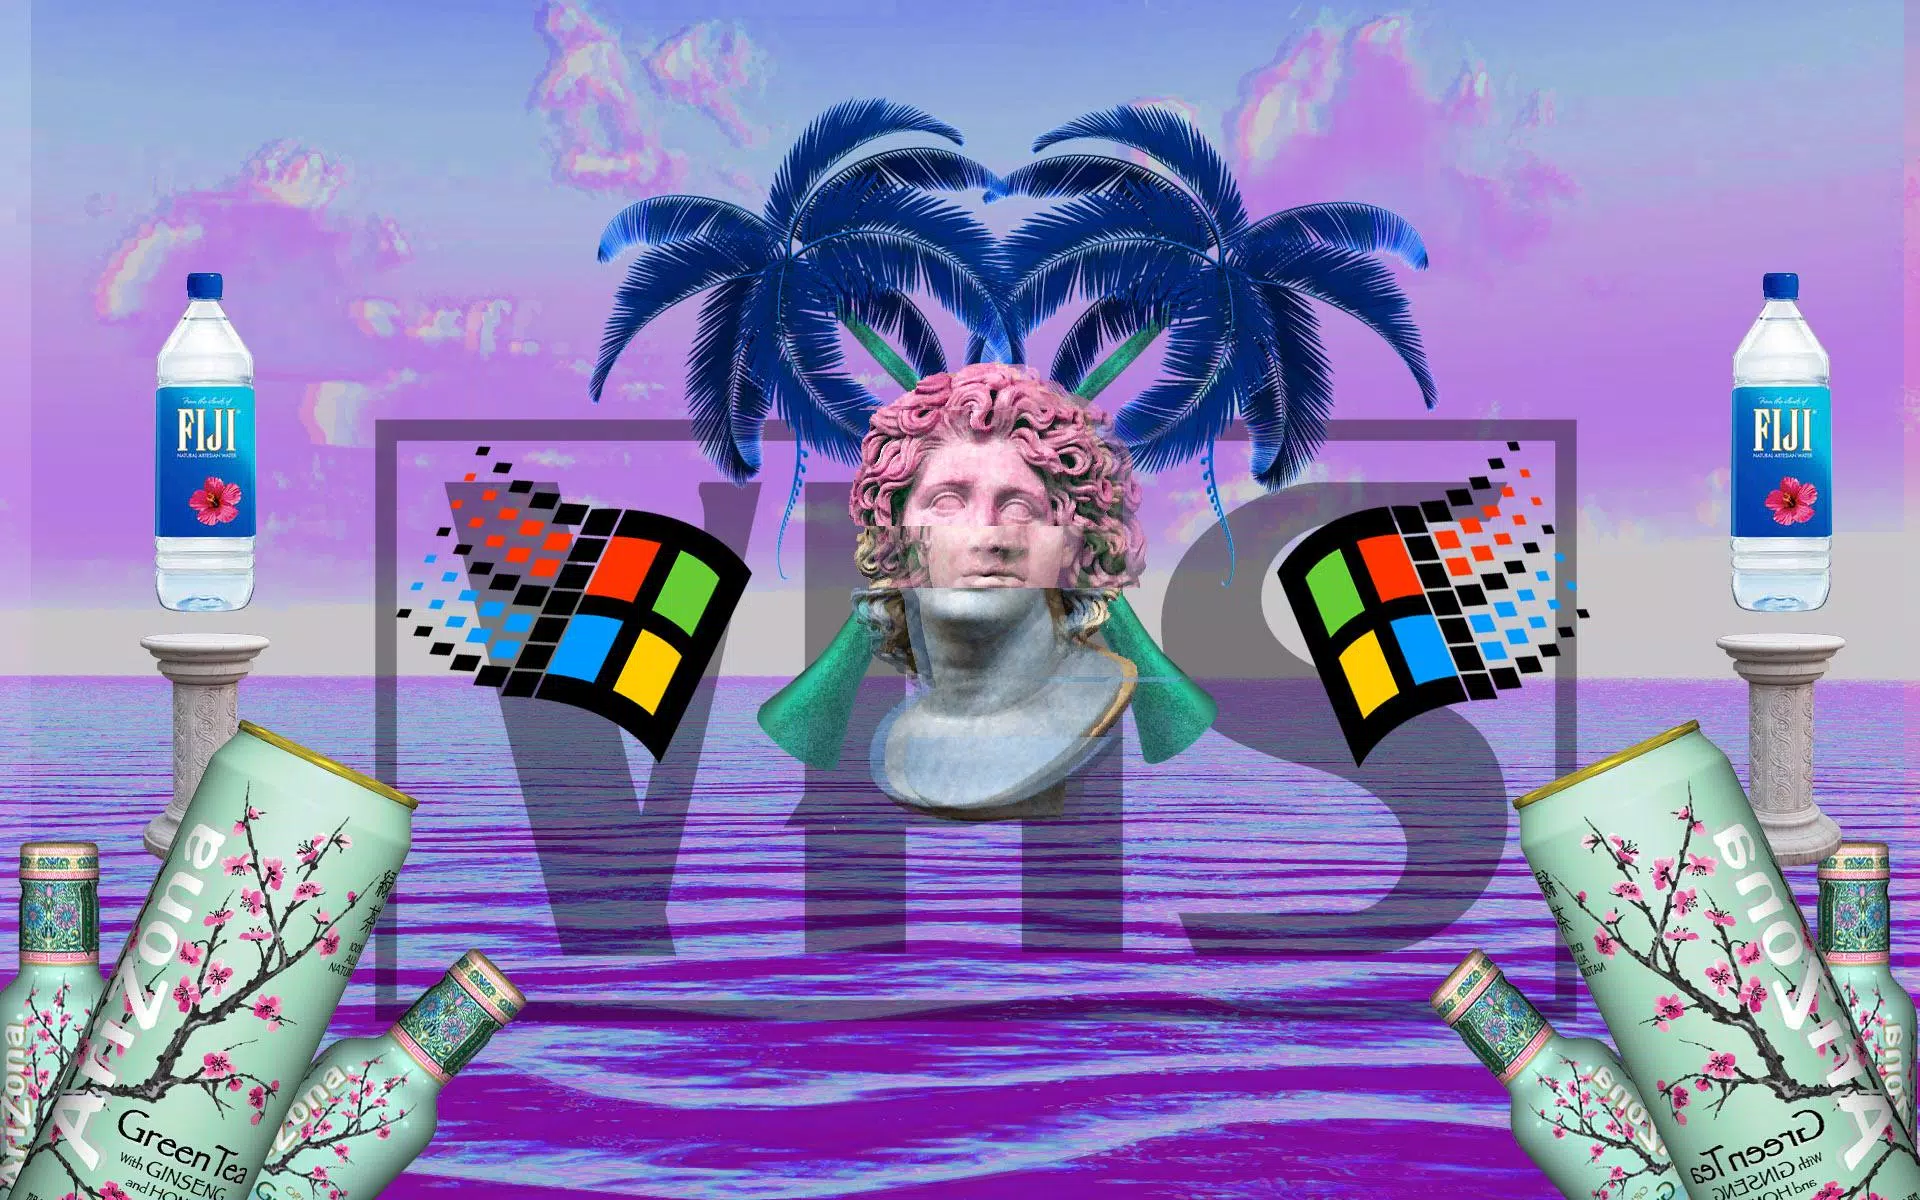 A collage of a bust of a man, palm trees, windows flags, and energy drinks - Vaporwave